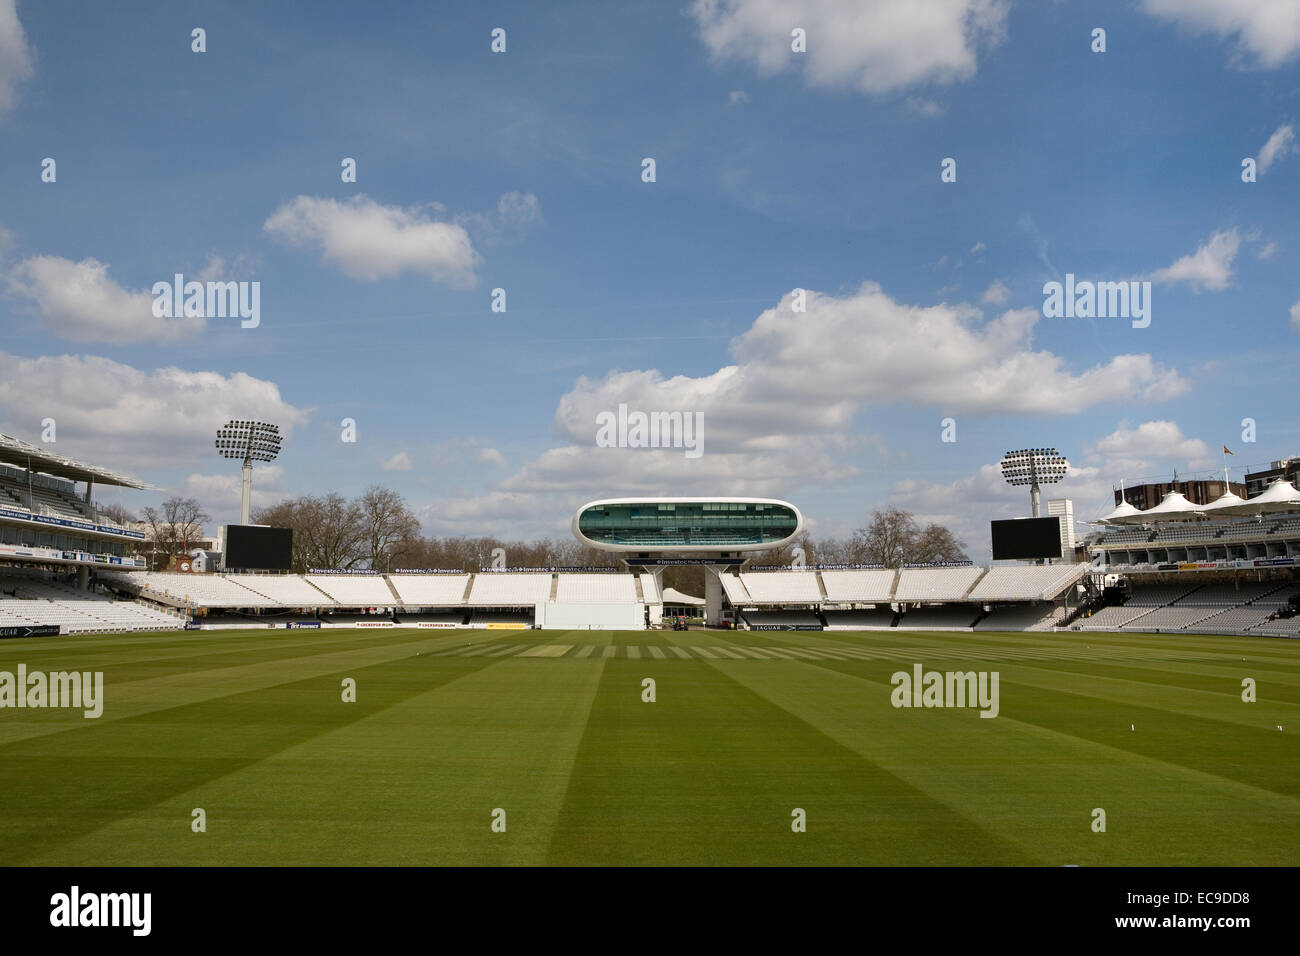 Le Lords Cricket Ground Banque D'Images